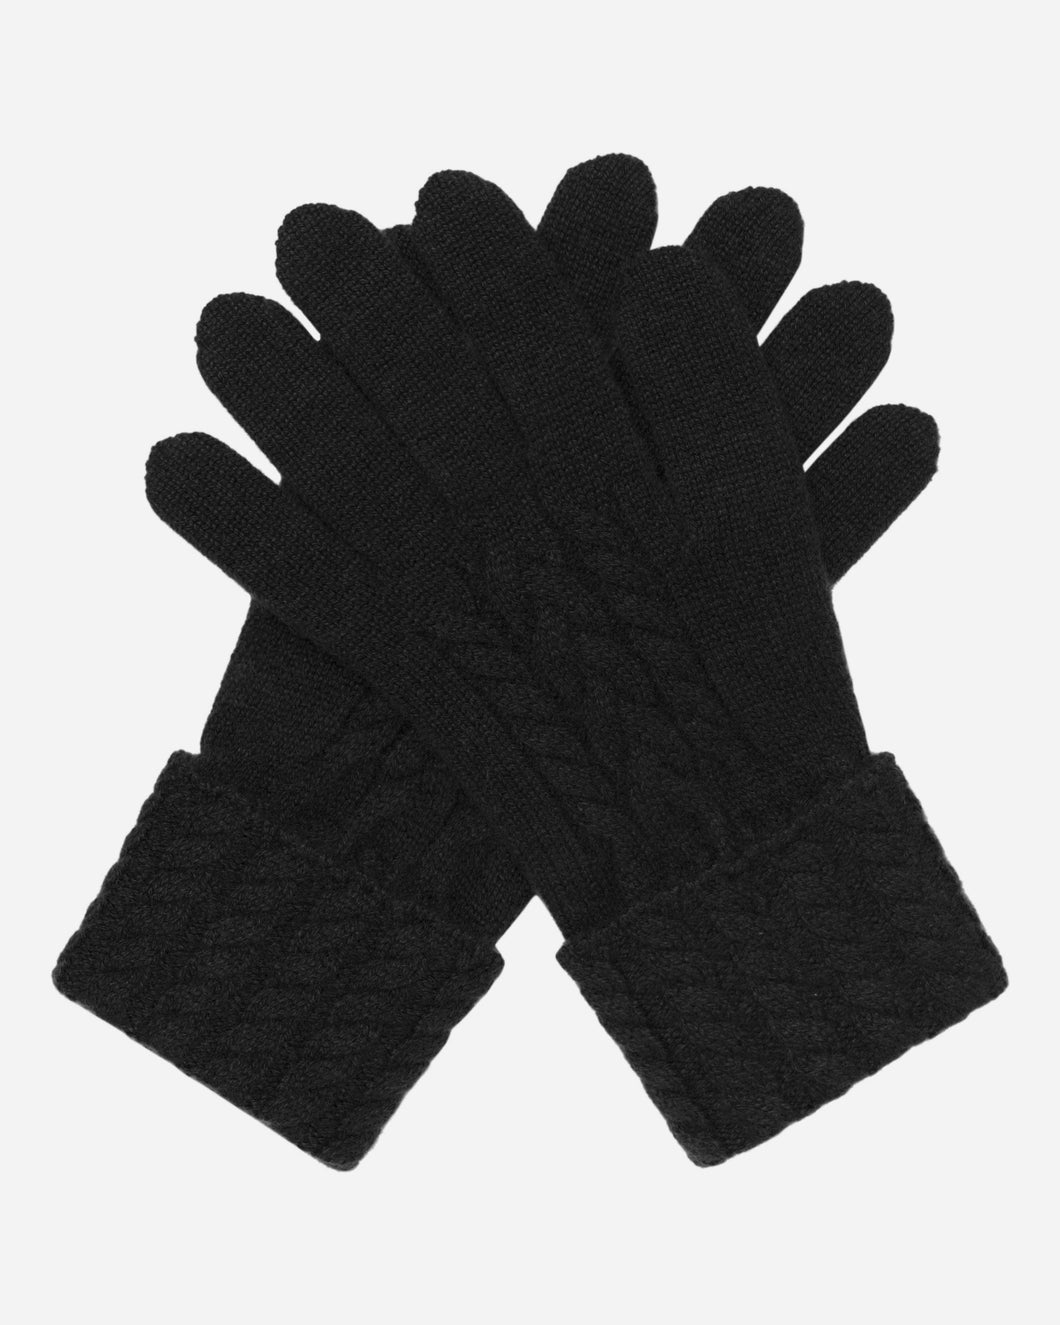 N.Peal Women's Cable Cashmere Gloves Black